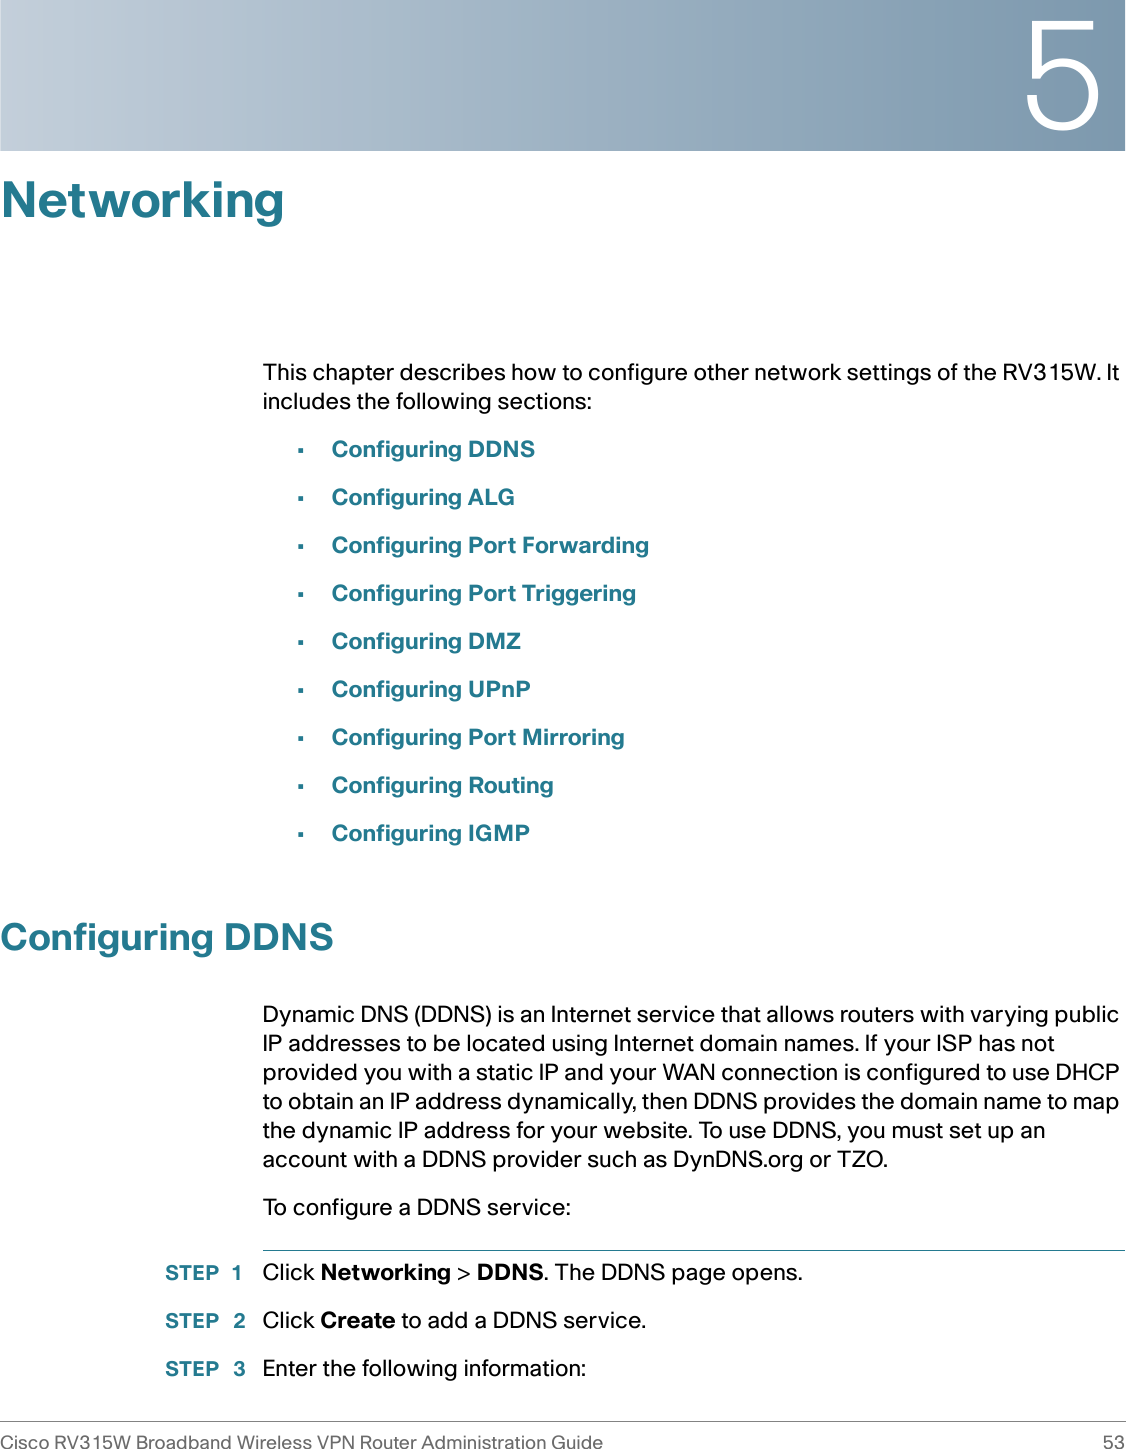 5Cisco RV315W Broadband Wireless VPN Router Administration Guide 53NetworkingThis chapter describes how to configure other network settings of the RV315W. It includes the following sections: •Configuring DDNS•Configuring ALG•Configuring Port Forwarding•Configuring Port Triggering•Configuring DMZ•Configuring UPnP•Configuring Port Mirroring•Configuring Routing•Configuring IGMPConfiguring DDNSDynamic DNS (DDNS) is an Internet service that allows routers with varying public IP addresses to be located using Internet domain names. If your ISP has not provided you with a static IP and your WAN connection is configured to use DHCP to obtain an IP address dynamically, then DDNS provides the domain name to map the dynamic IP address for your website. To use DDNS, you must set up an account with a DDNS provider such as DynDNS.org or TZO. To configure a DDNS service: STEP 1 Click Networking &gt; DDNS. The DDNS page opens.STEP  2 Click Create to add a DDNS service. STEP  3 Enter the following information: 